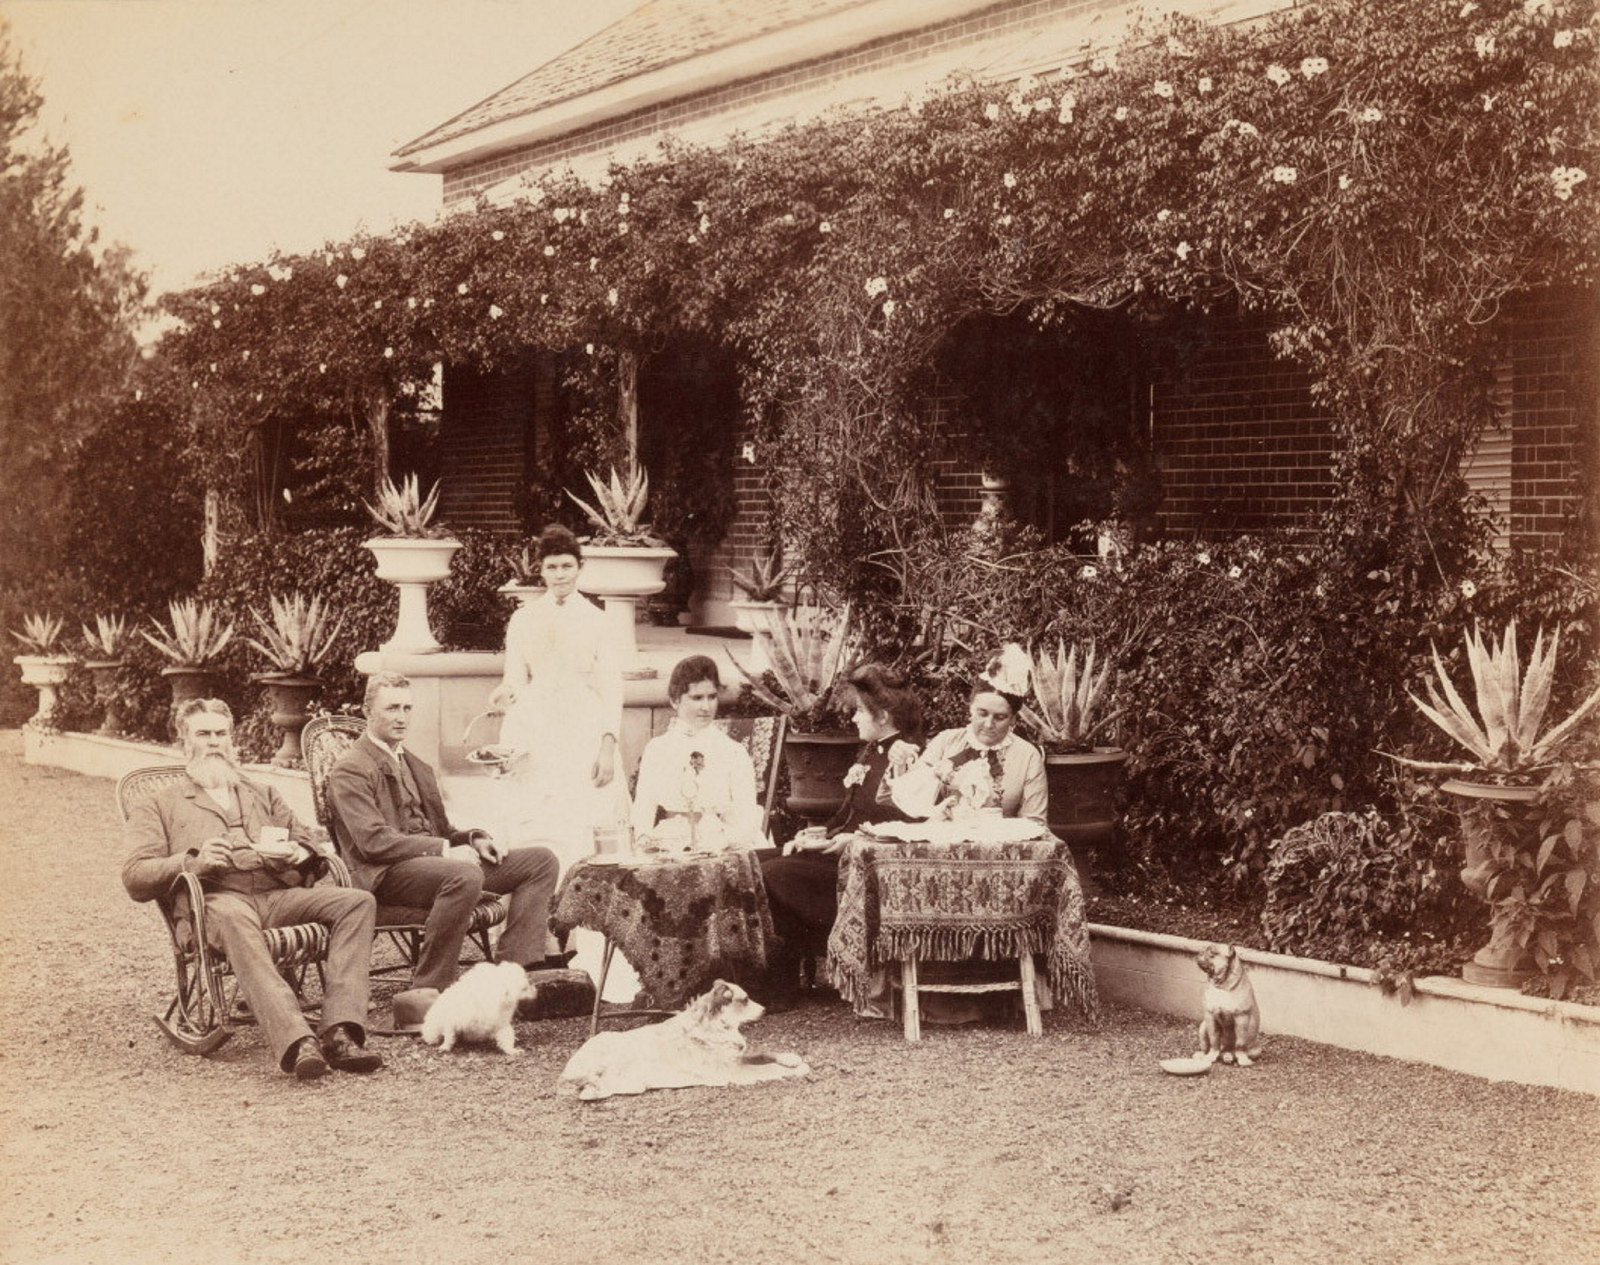 Cook family on the driveway in front of Turanville near Scone / photograpjed by Joseph Check, 1889.